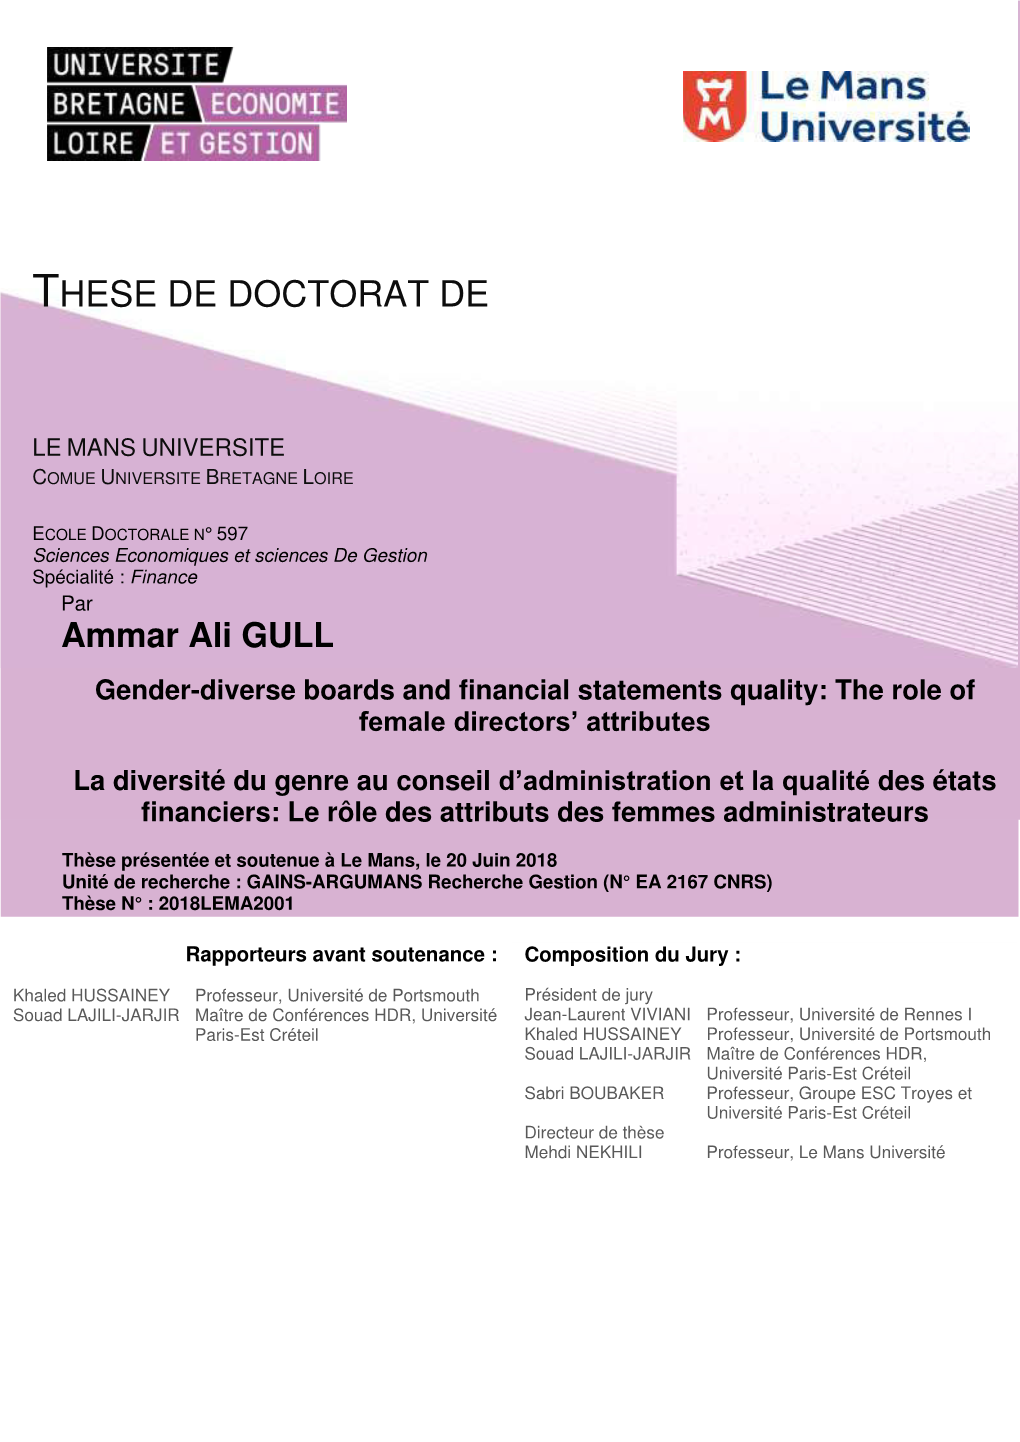 Gender-Diverse Boards and Financial Statements Quality: the Role of Female Directors’ Attributes